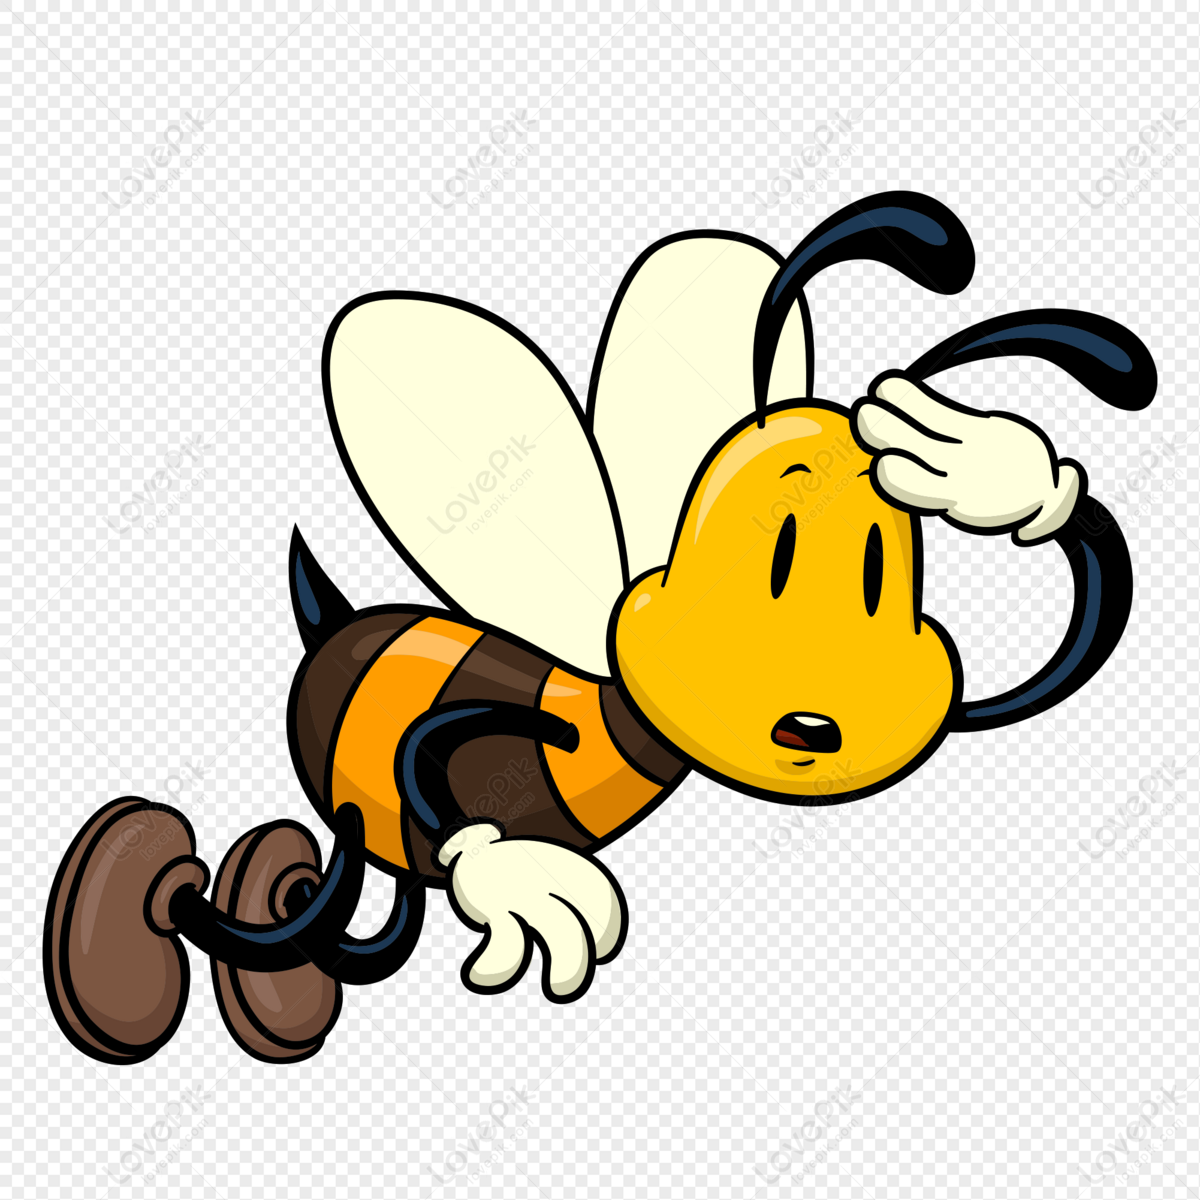 Cartoon Bee PNG Picture And Clipart Image For Free Download - Lovepik |  401557575